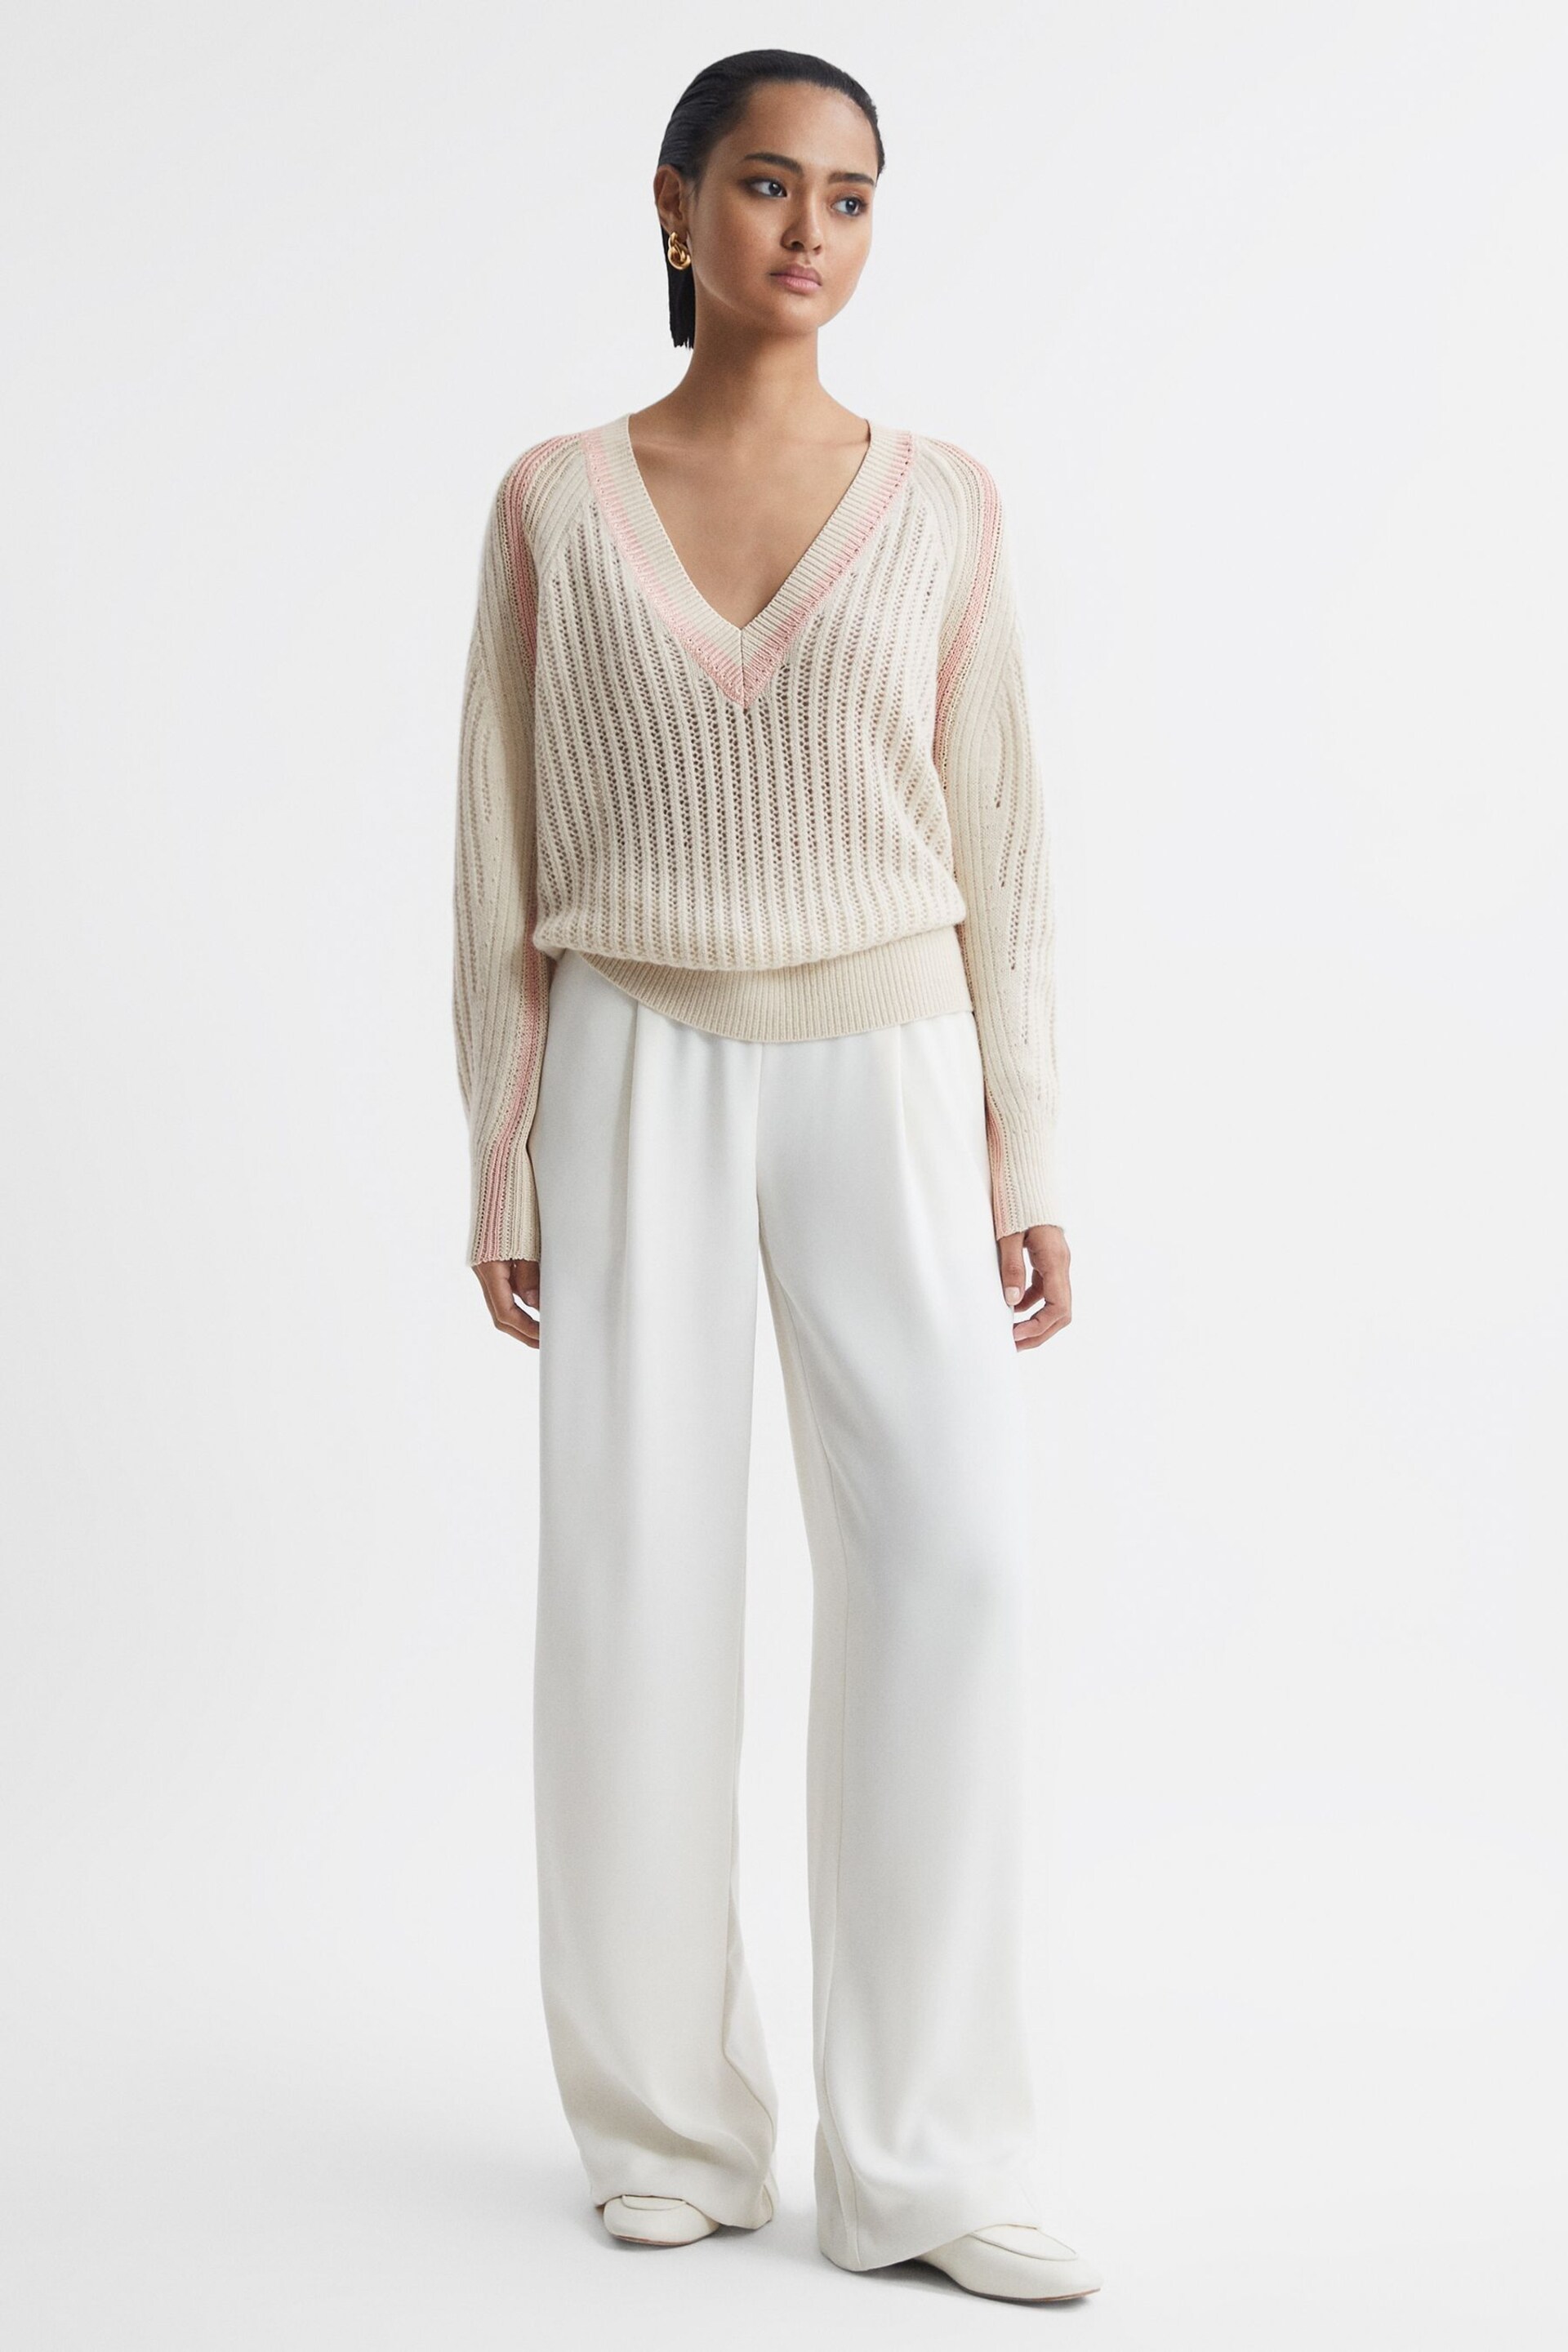 Reiss Cream/Nude Vale Wool Blend Knitted V-Neck Jumper - Image 3 of 5